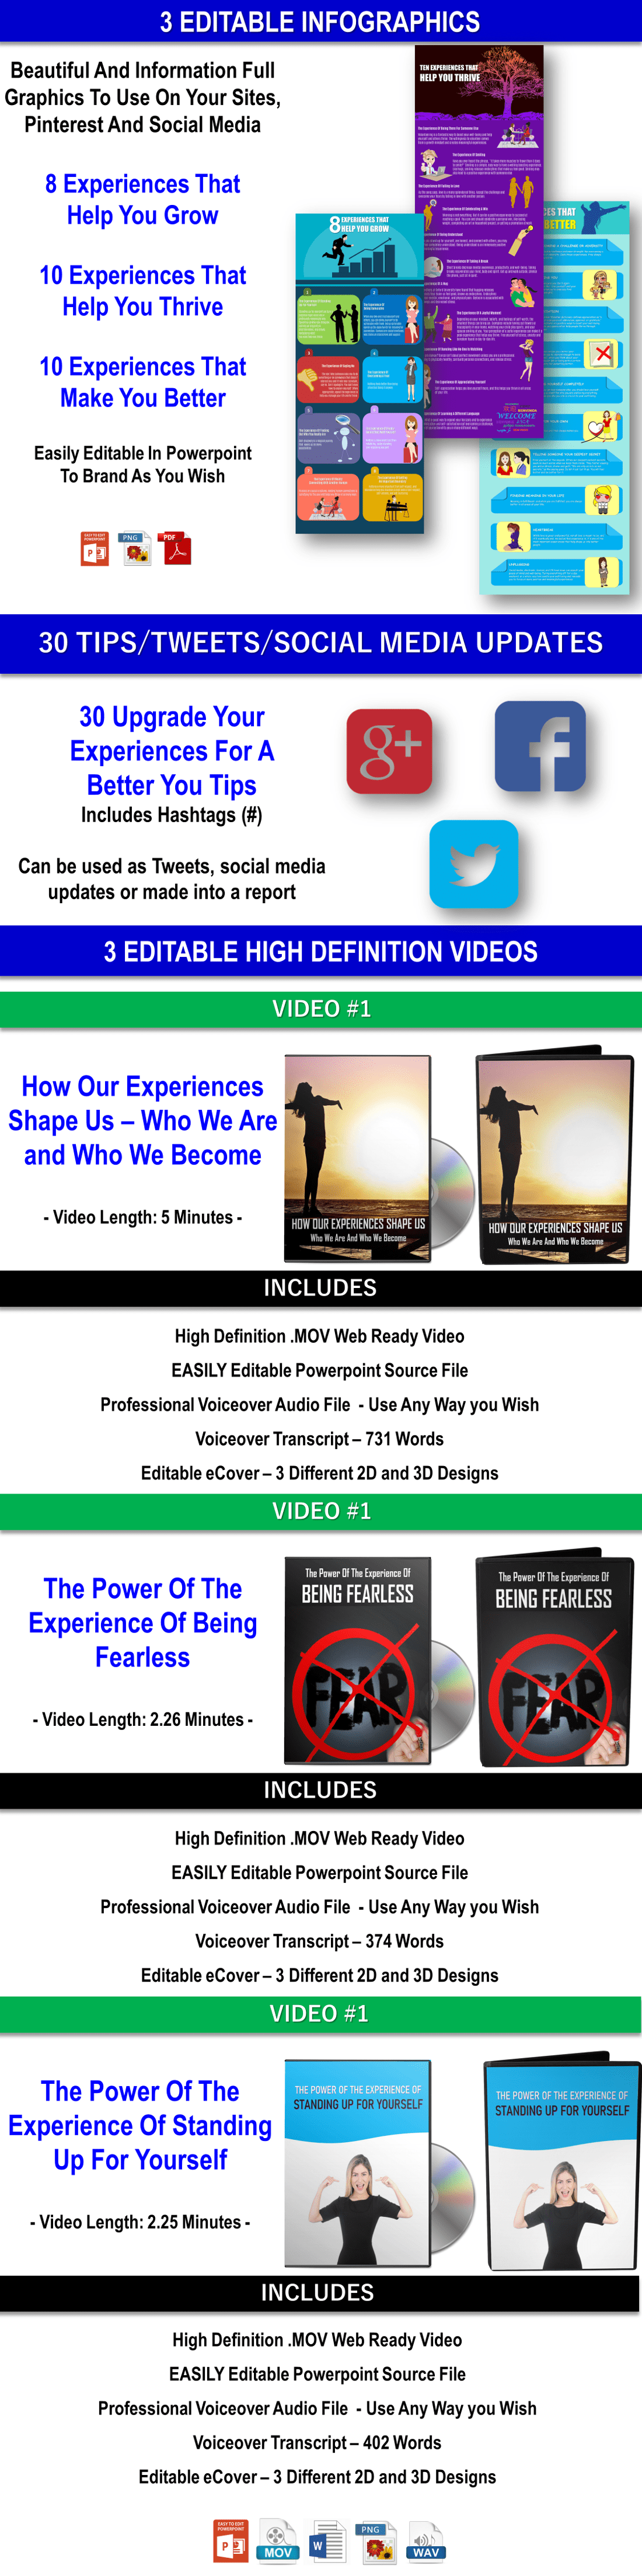 Upgrade Your Experiences For A Better You PLR Massive PLR Package 2